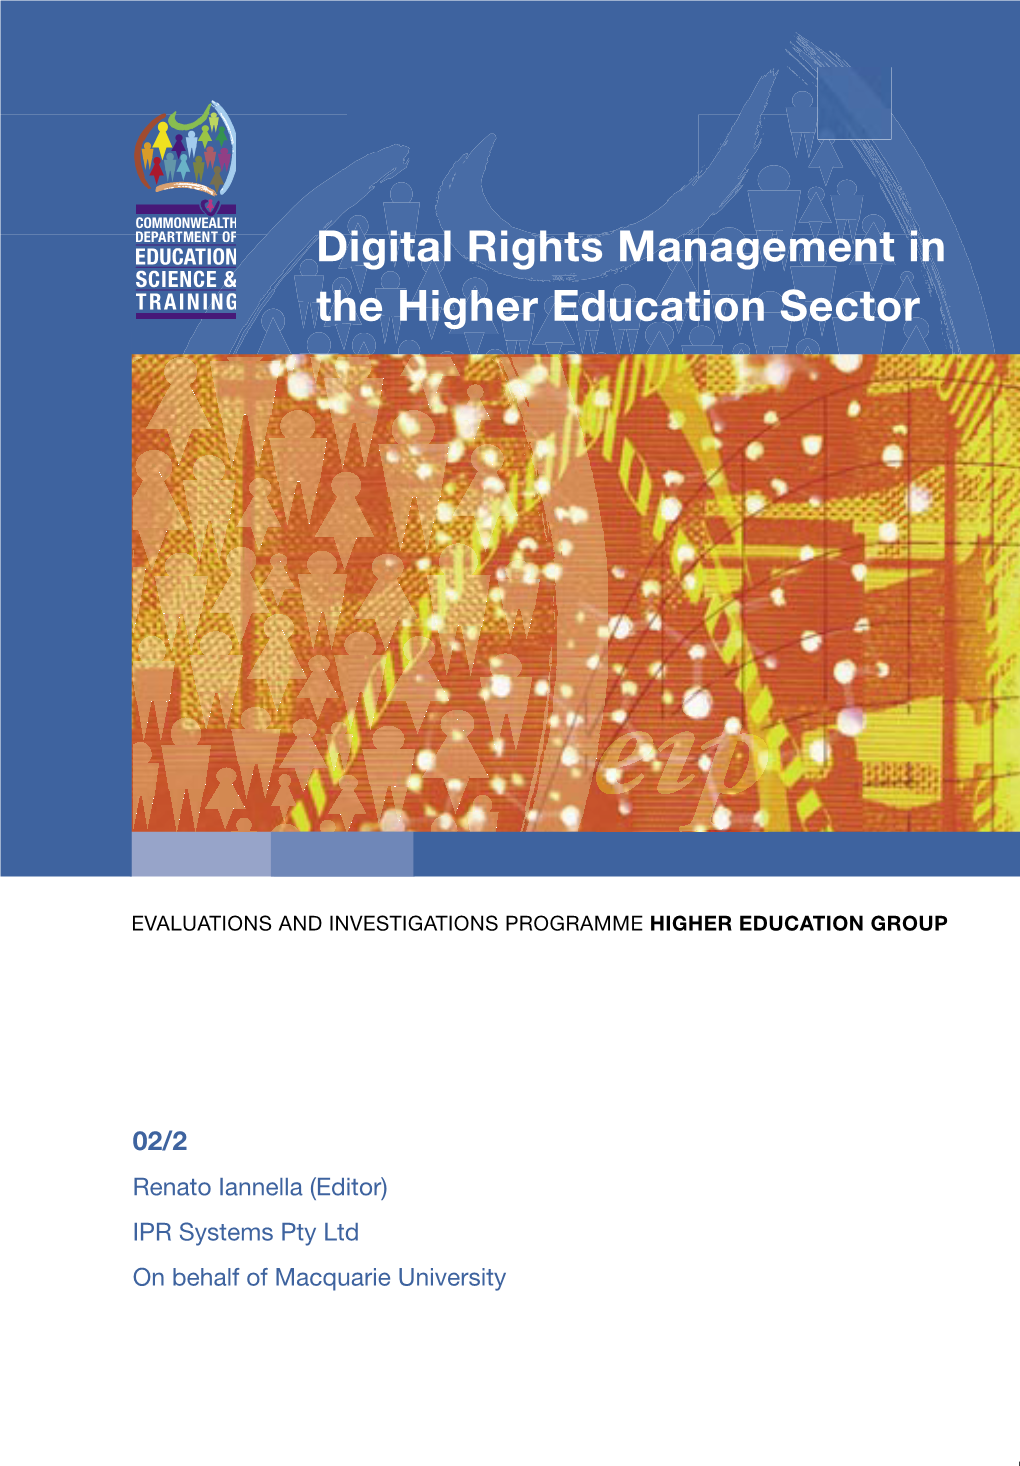 Digital Rights Management in the Higher Education Sector